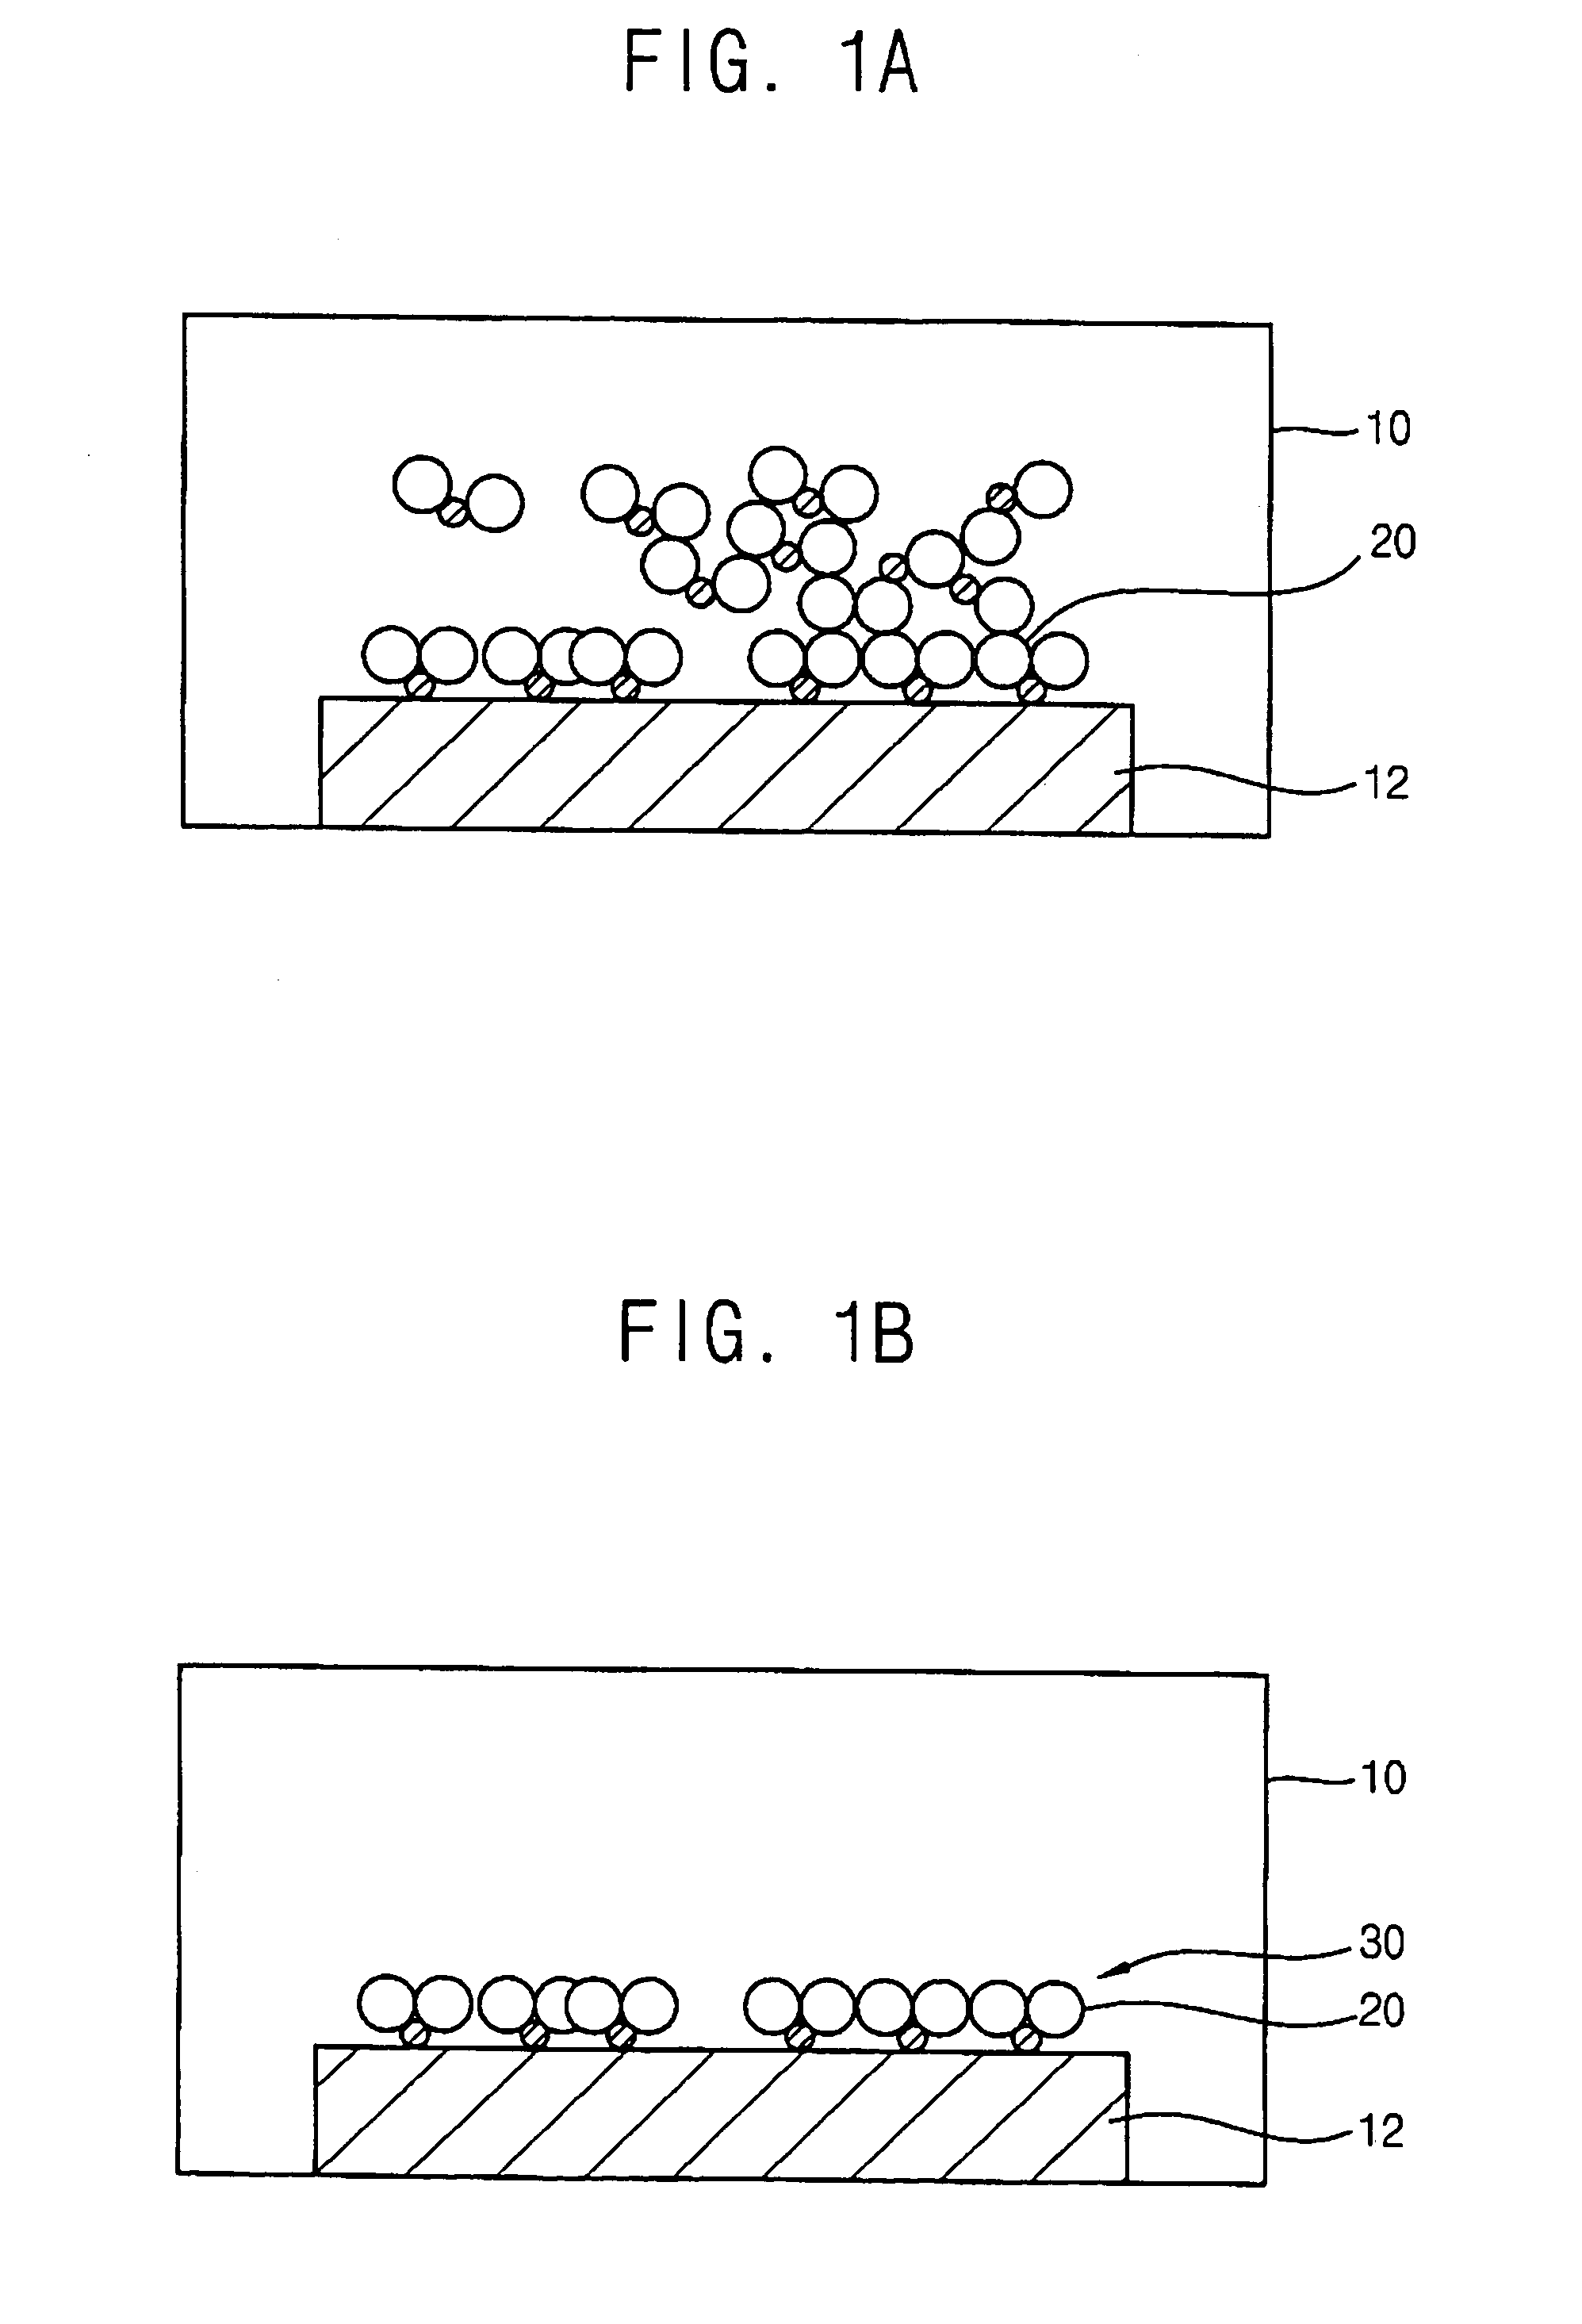 Method of forming a layer on a semiconductor substrate